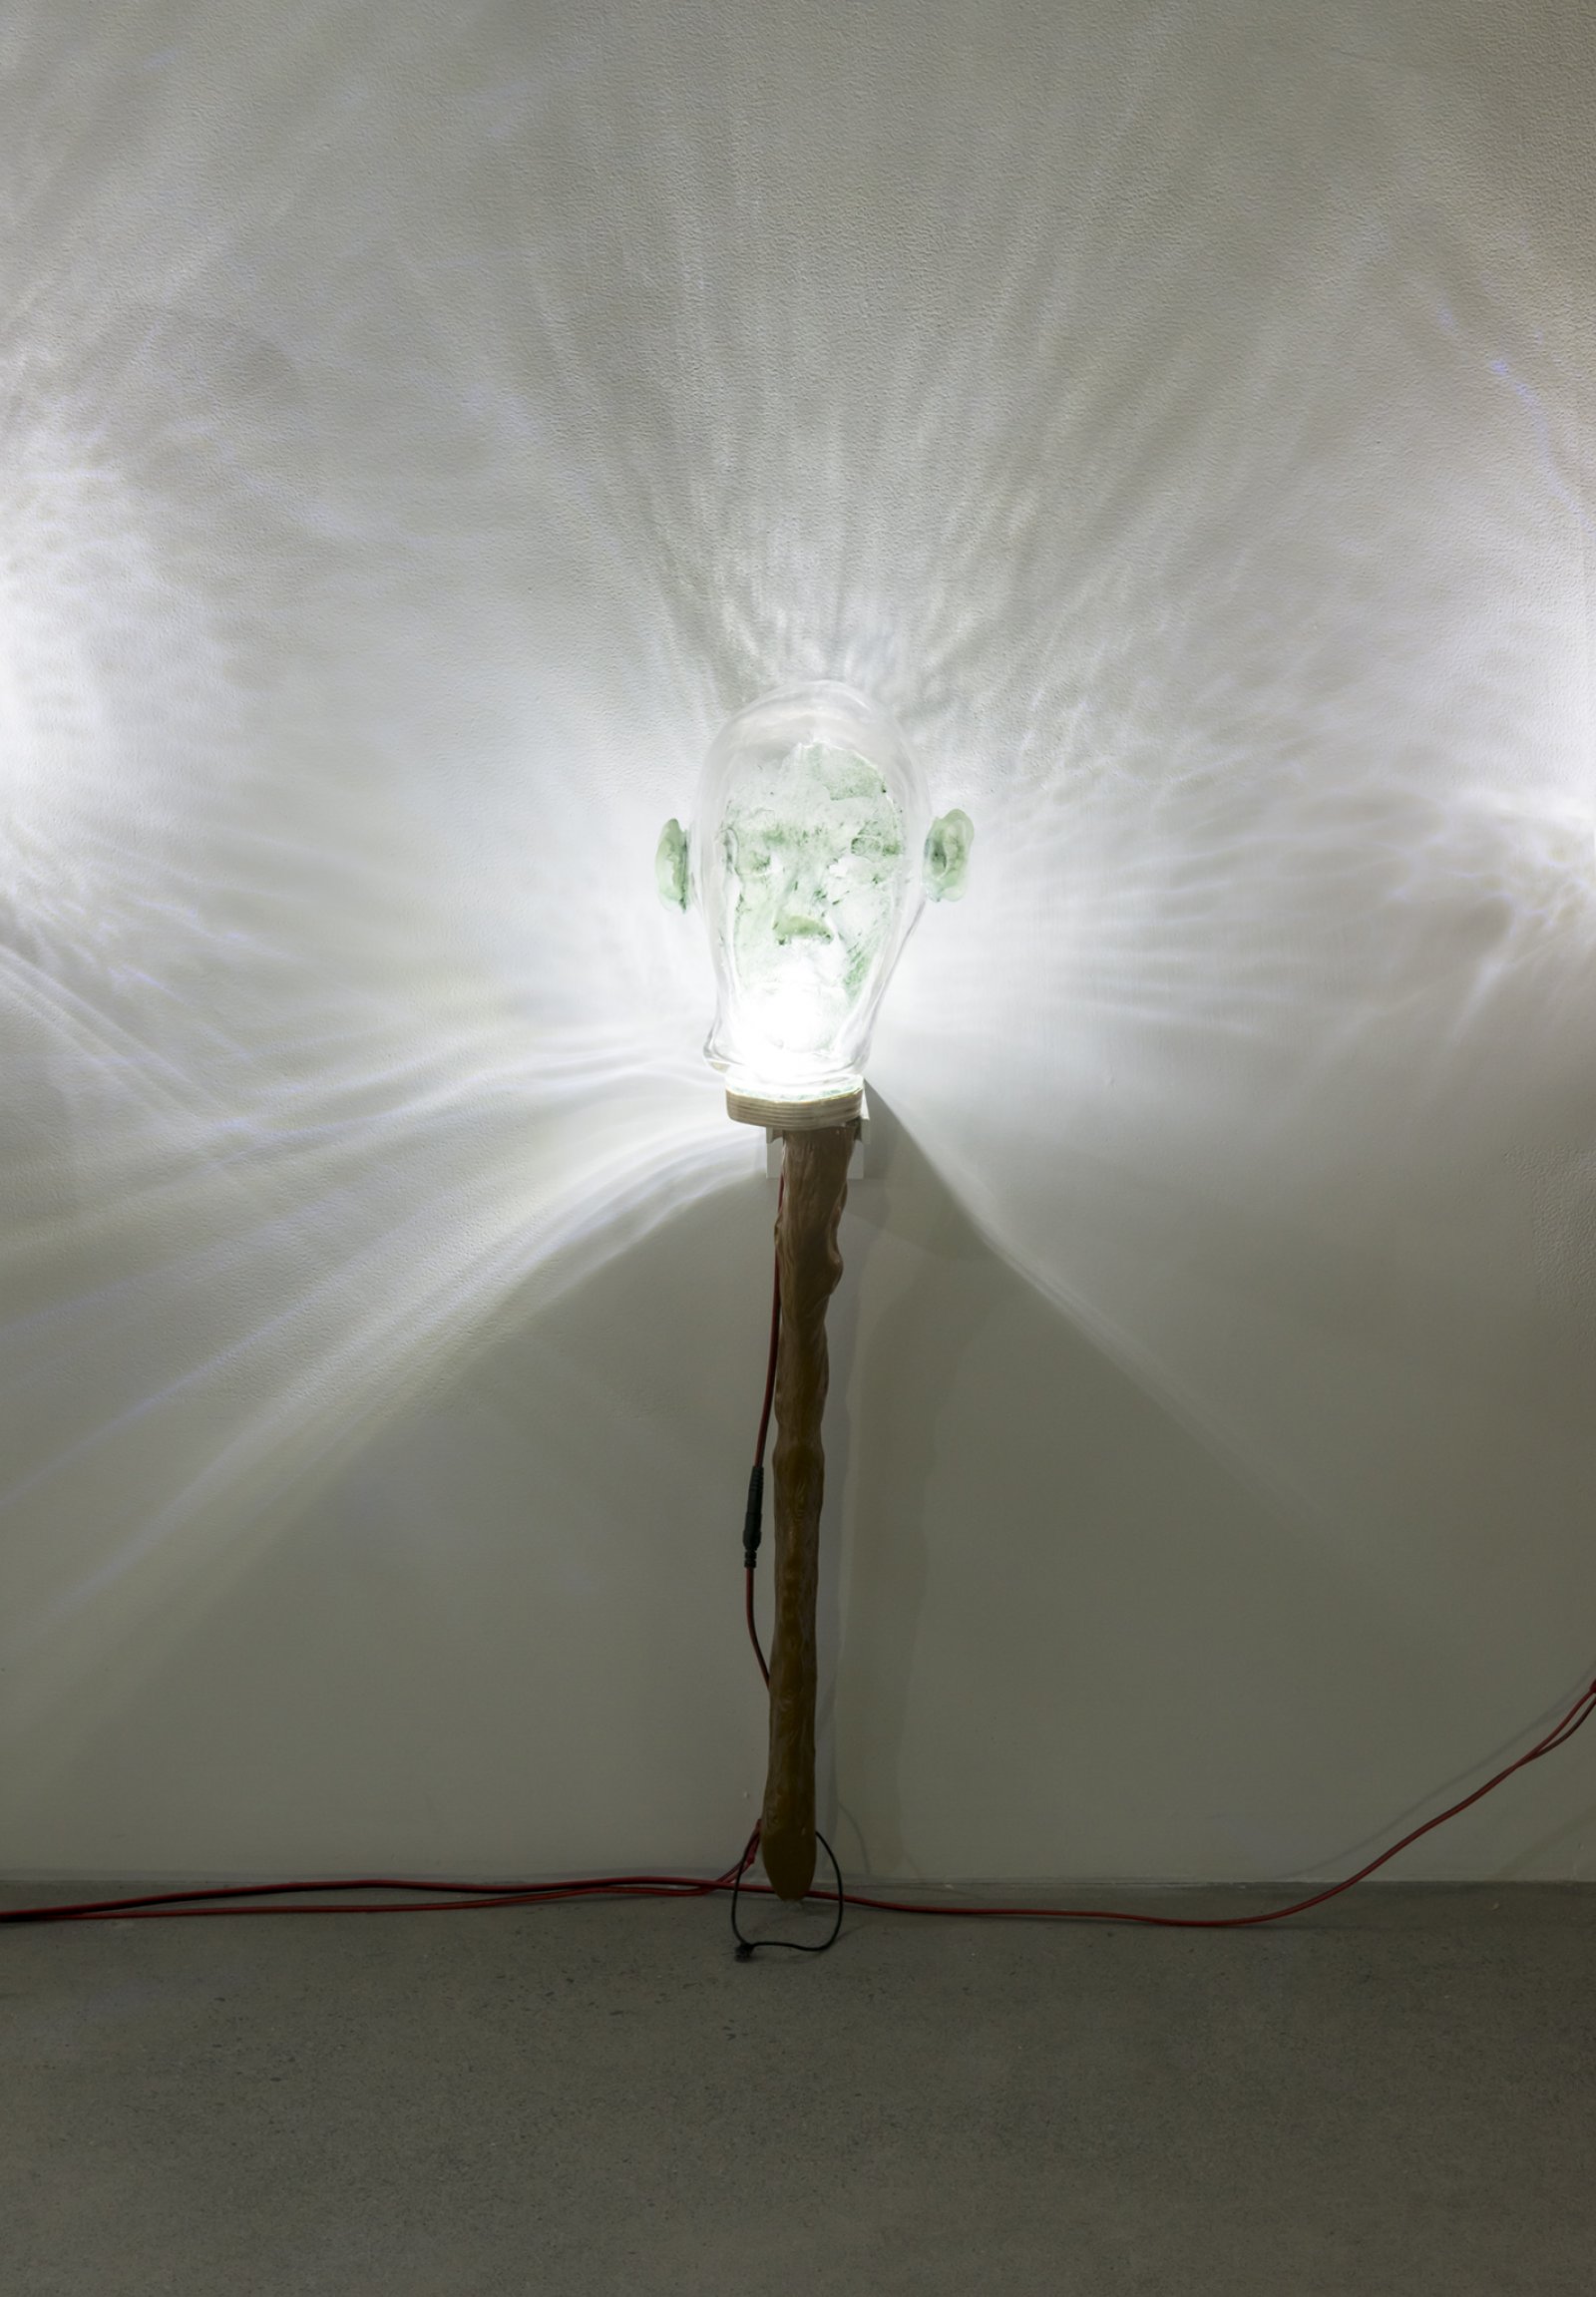 ​​Julia Feyrer, Witnesses, 2018, spirulina, quidditch broom handle, handblown glass, dyed silicone, LED lights, 34 x 7 x 10 in. (86 x 18 x 25 cm)​ by Julia Feyrer